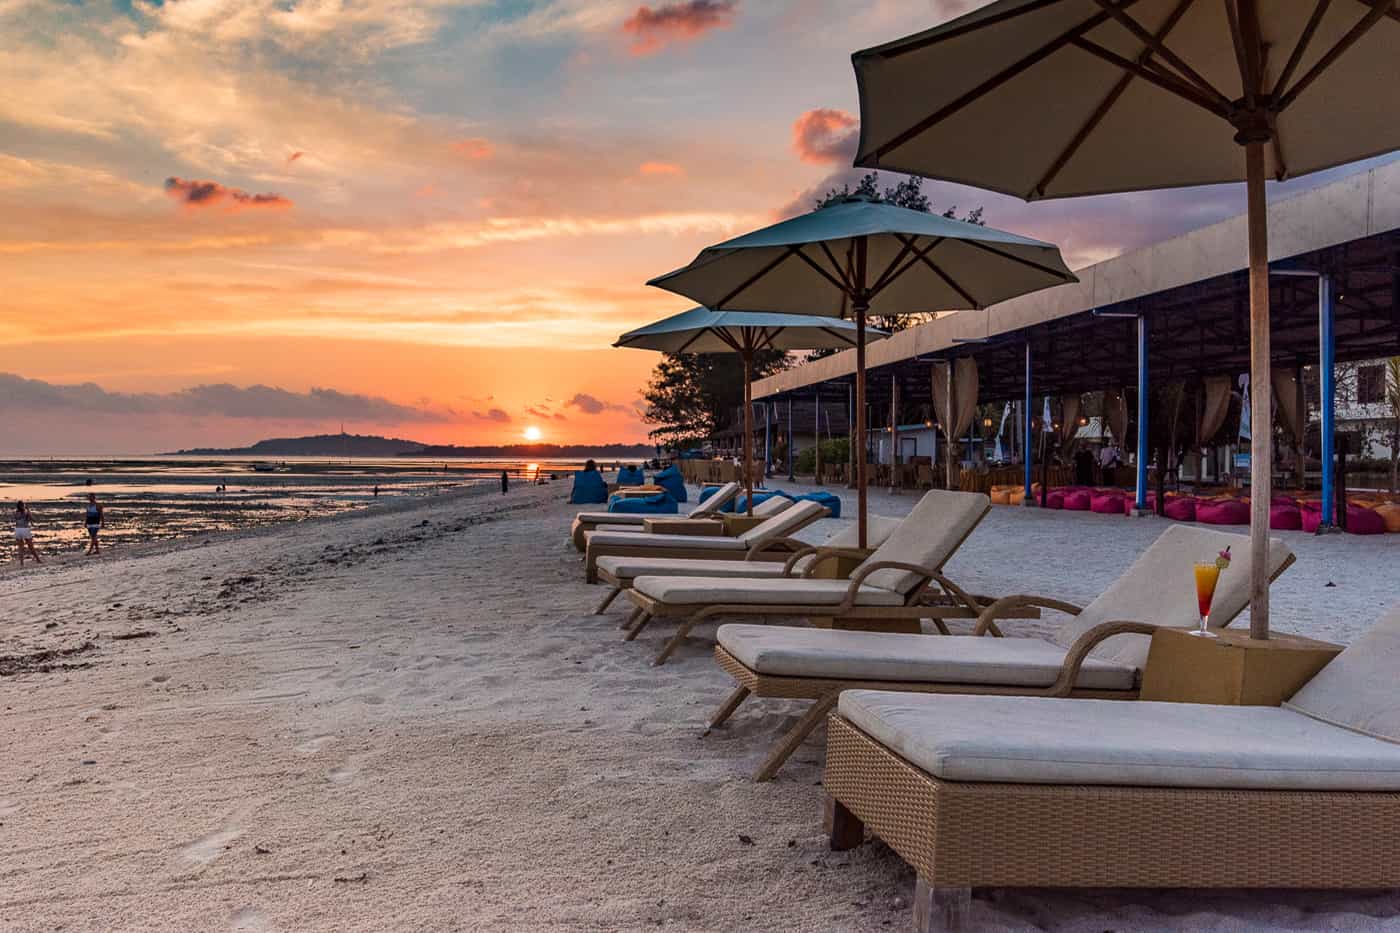 Sunset beach view at Hotel Ombak Paradise in the Gili Islands of Lombok Indonesia